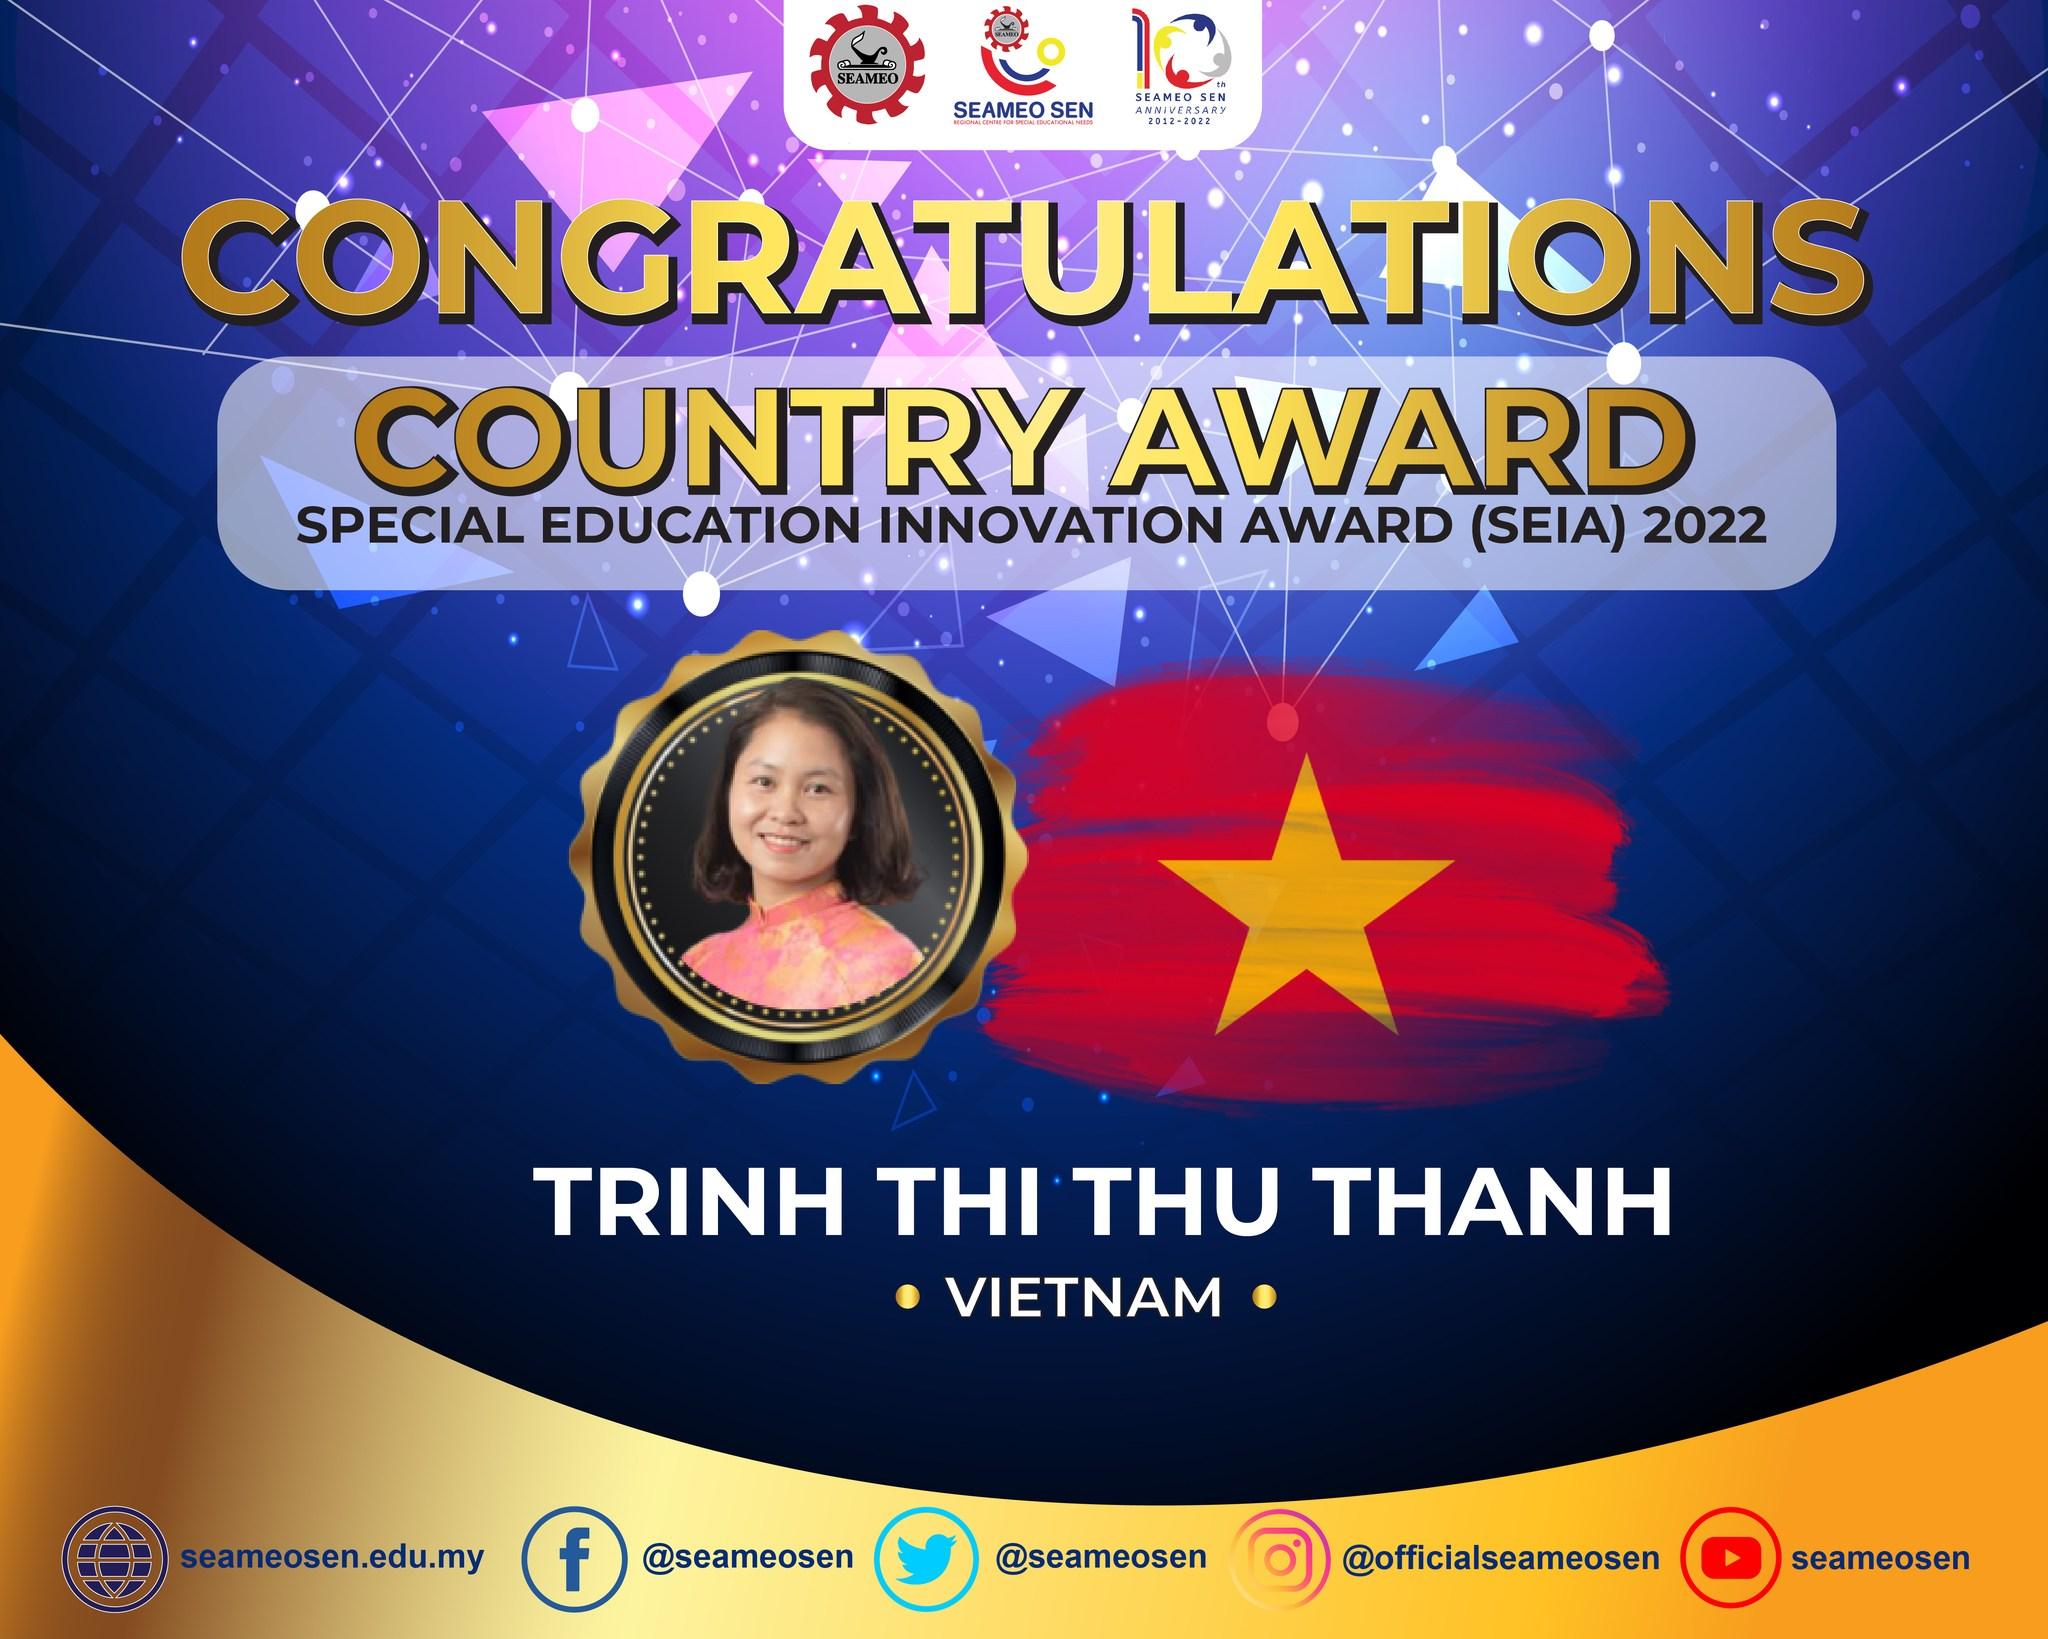 Country Award for Vietnam is Mdm. Trinh Thi Thu Thanh